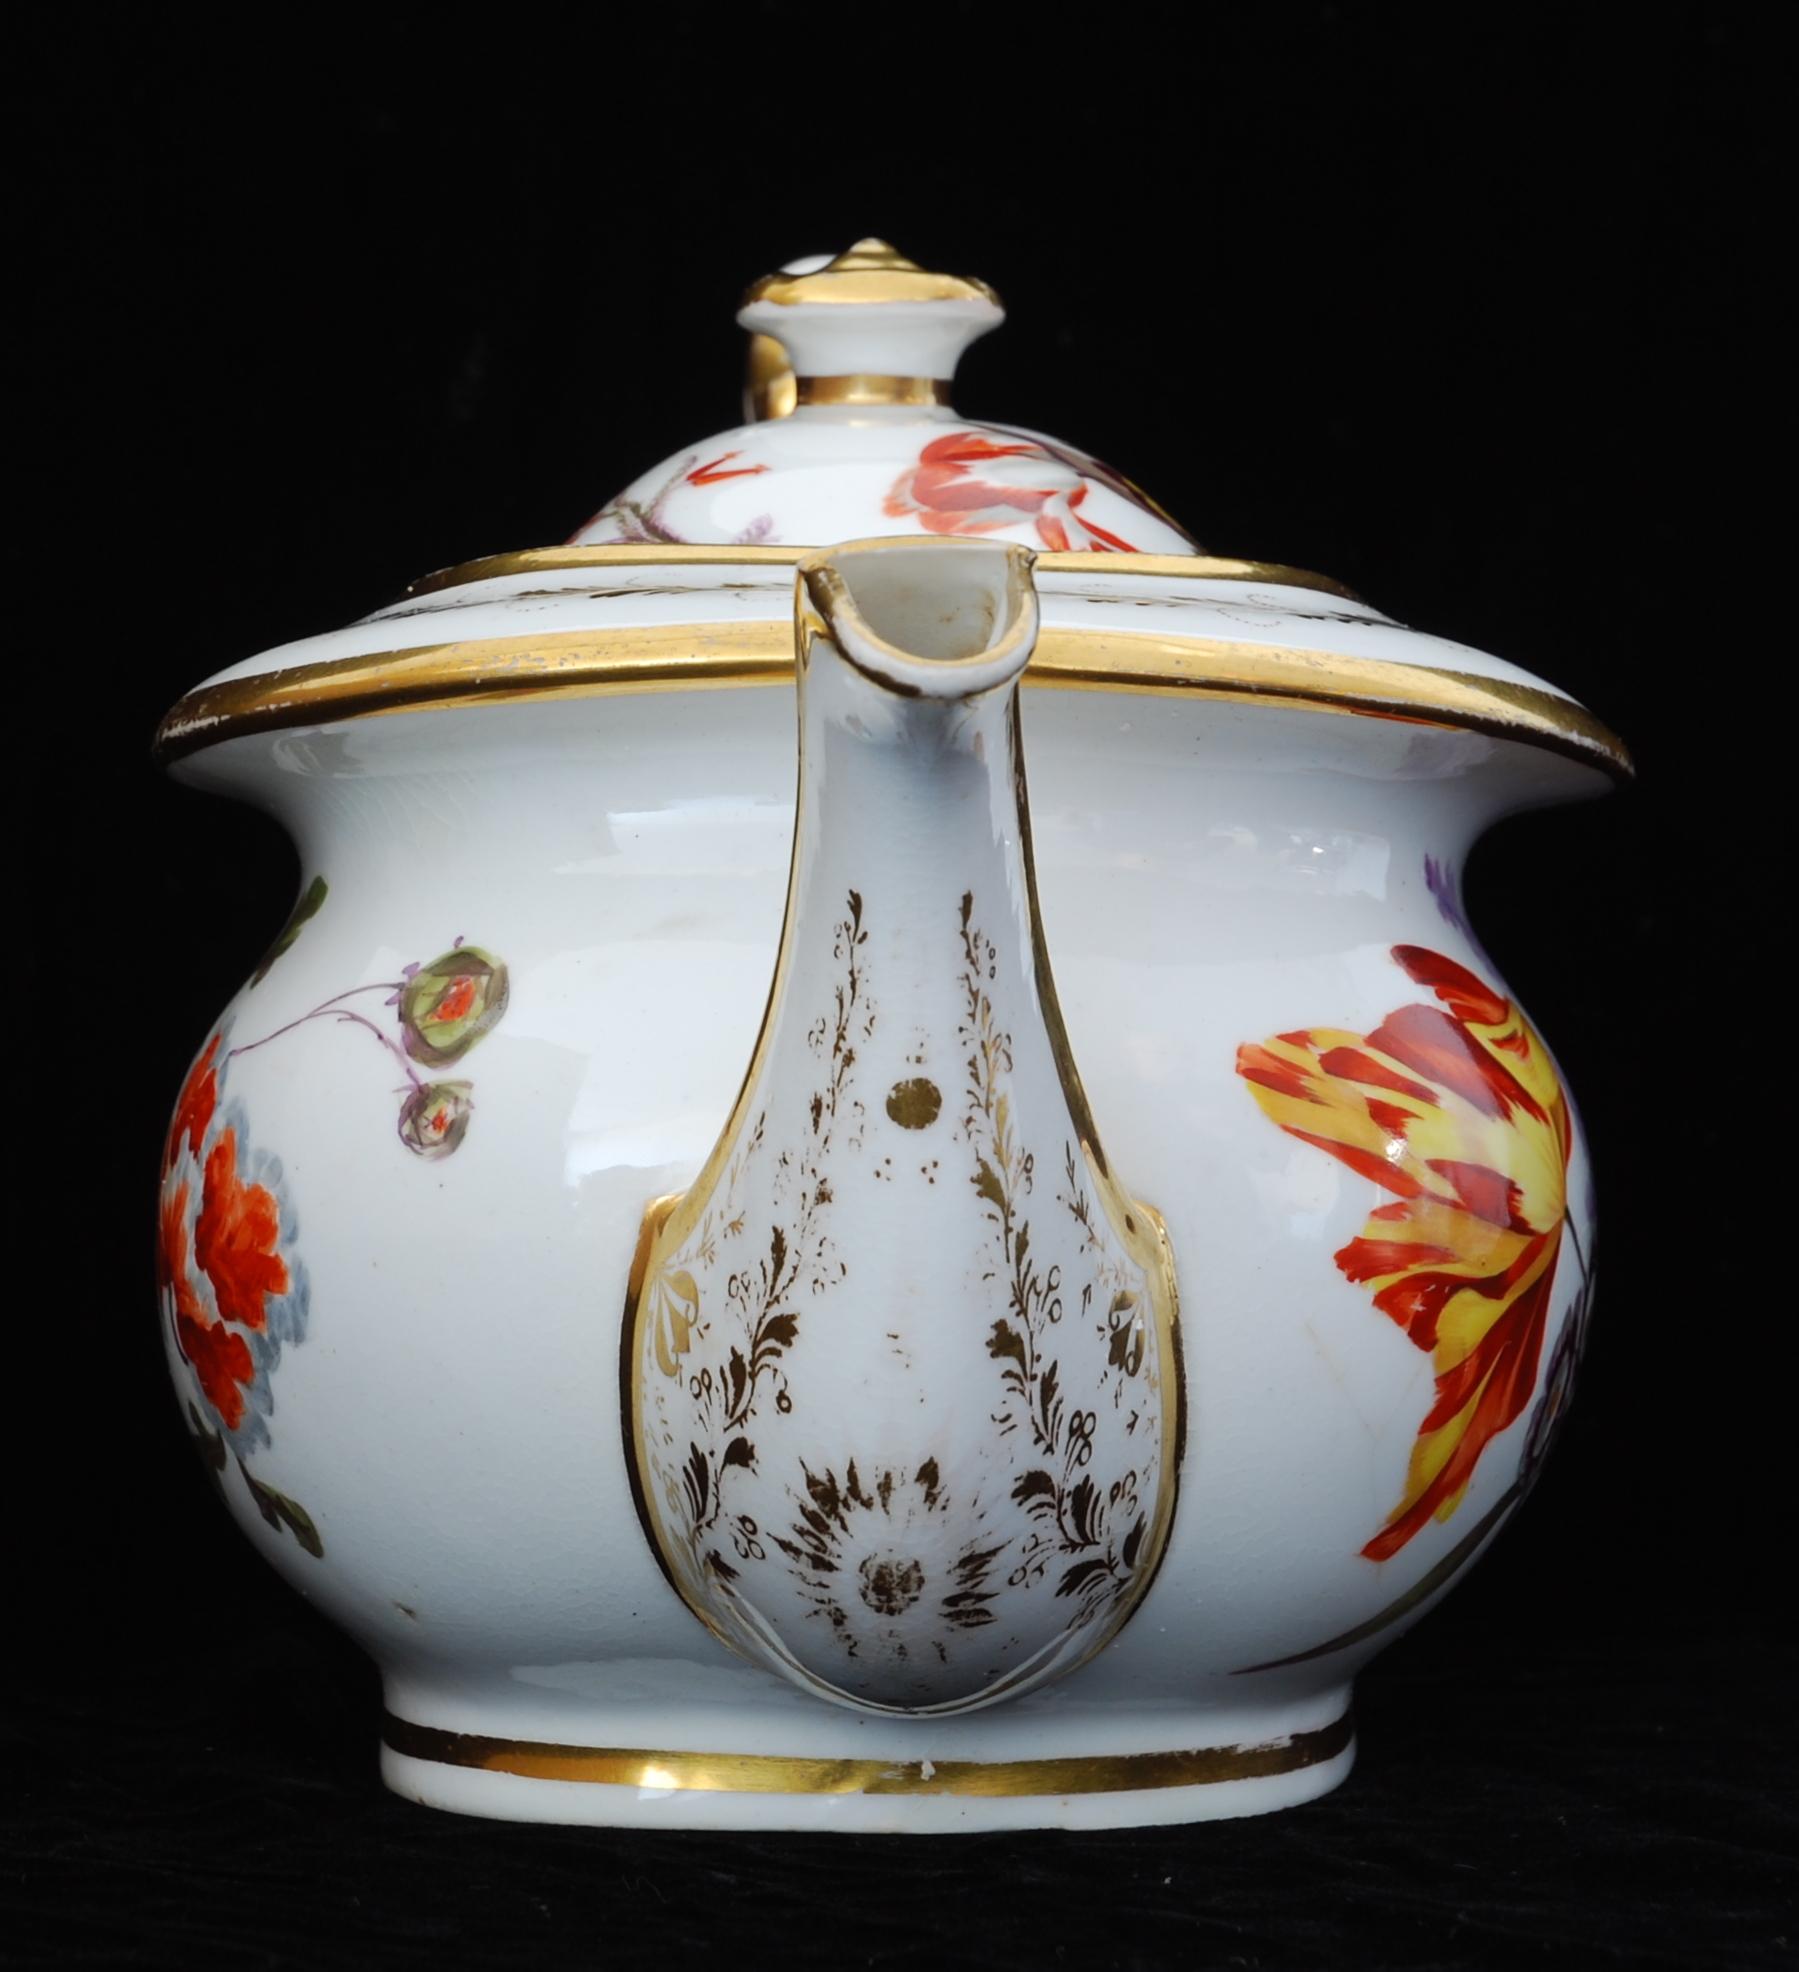 An exceptionally rare teapot, sugar and creamer in Nantgarw’s superb soft-paste porcelain. Each piece is gilded and decorated in one of the London workshops with superb flower painting, probably by Moses Webster.

The Nantgarw factory lasted only